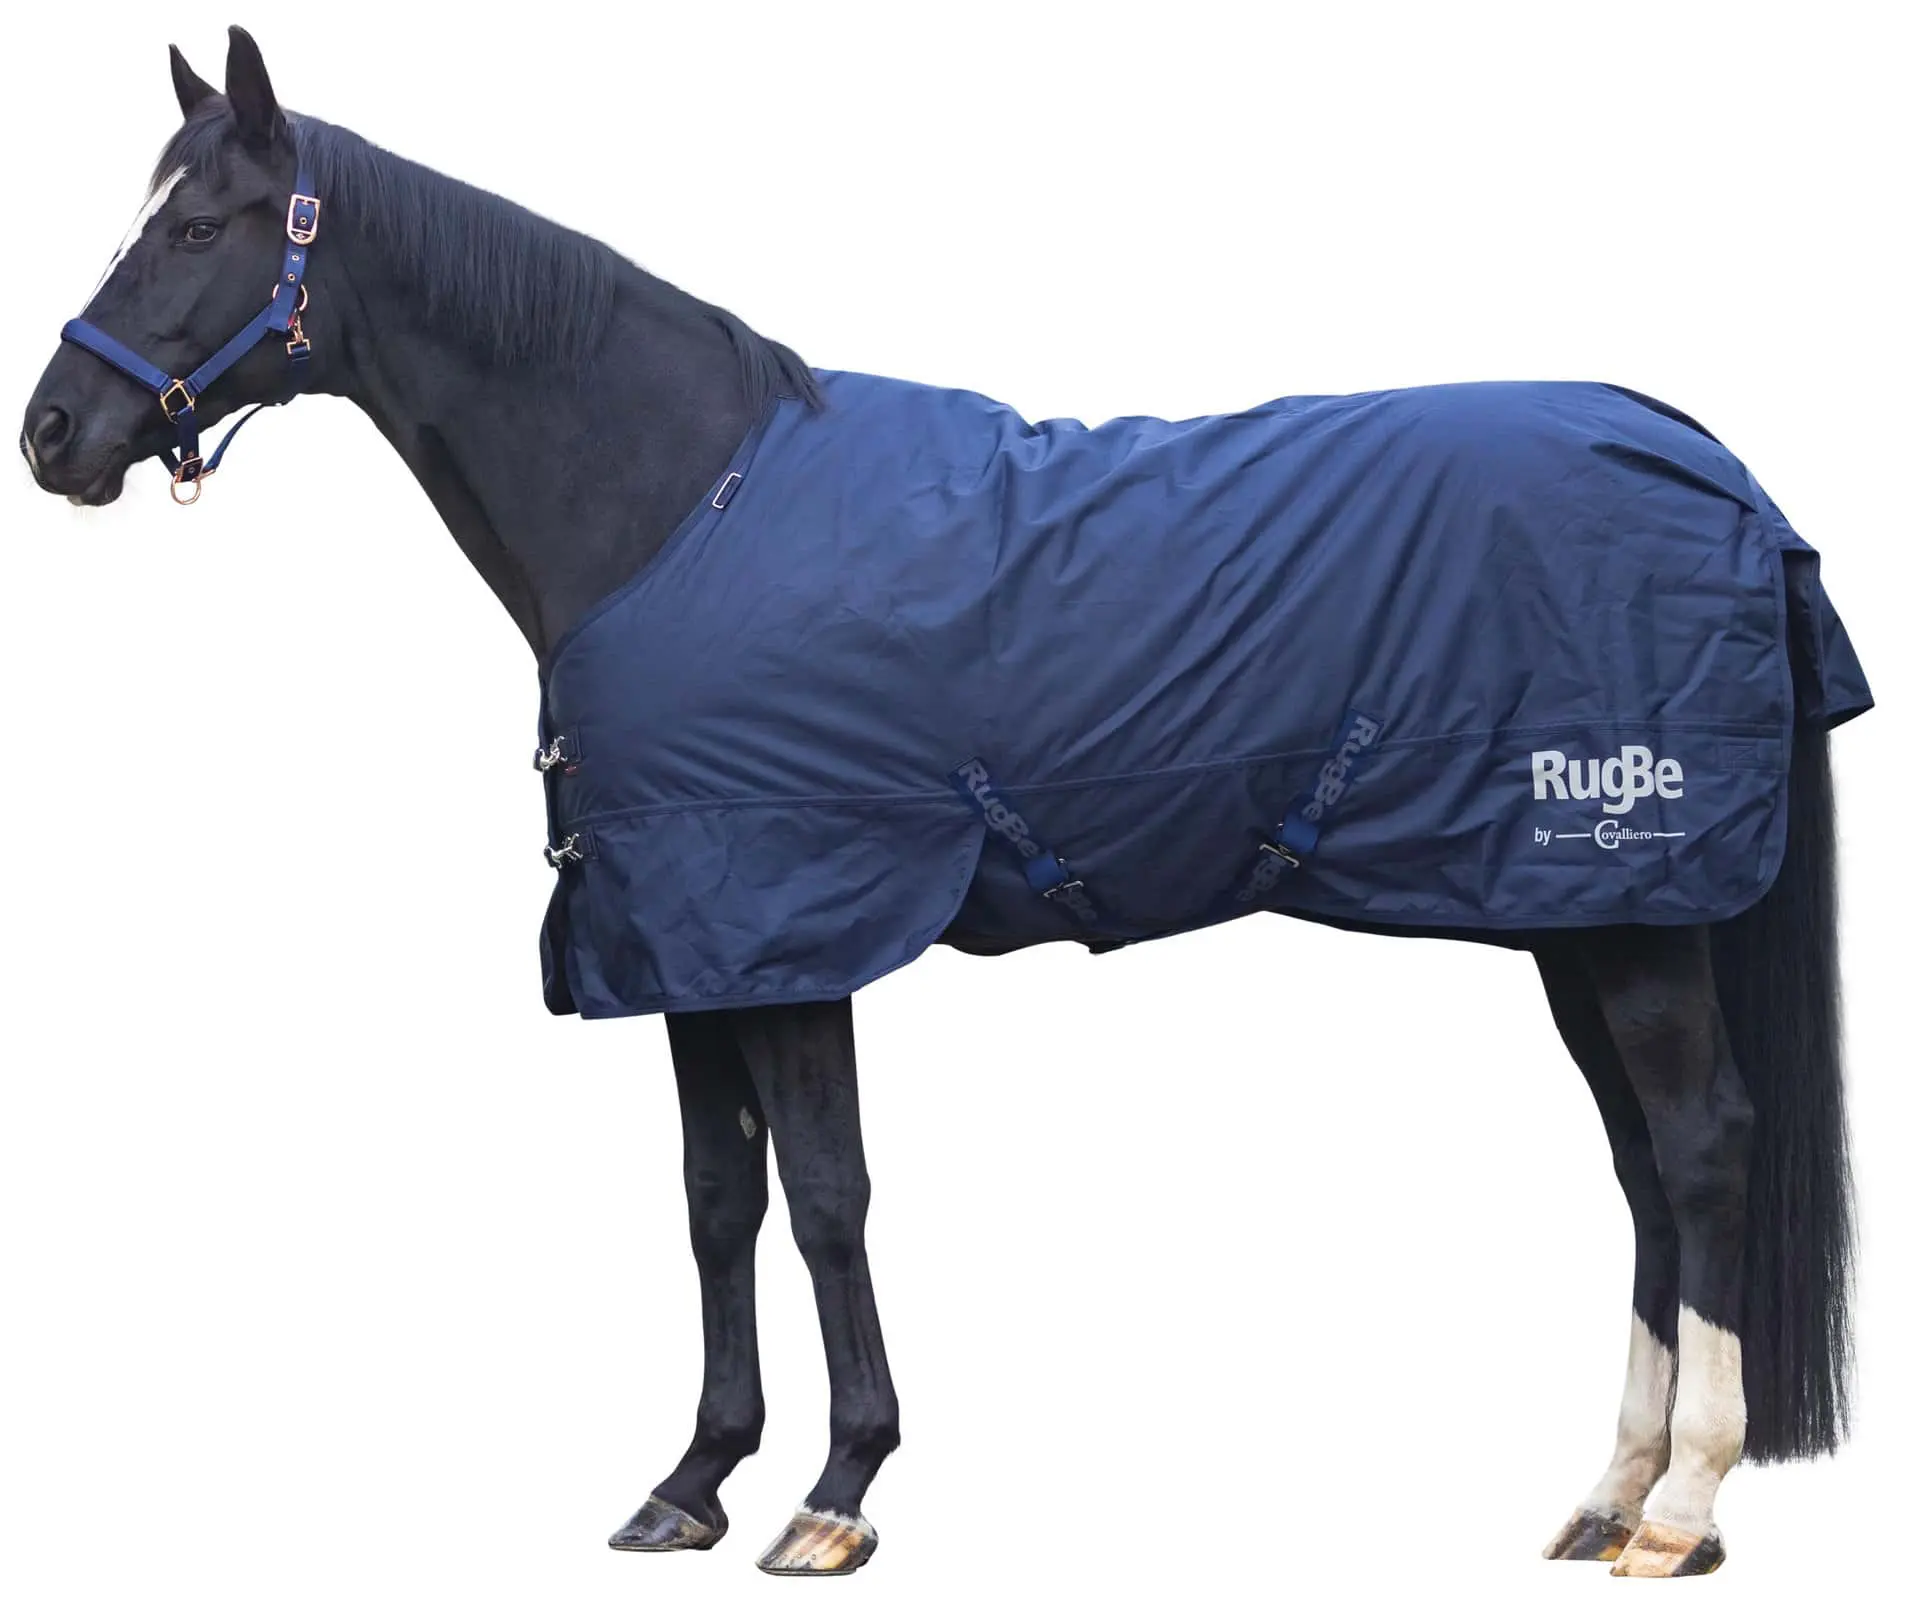 Winter horse blanket RugBe IceProtect 200g